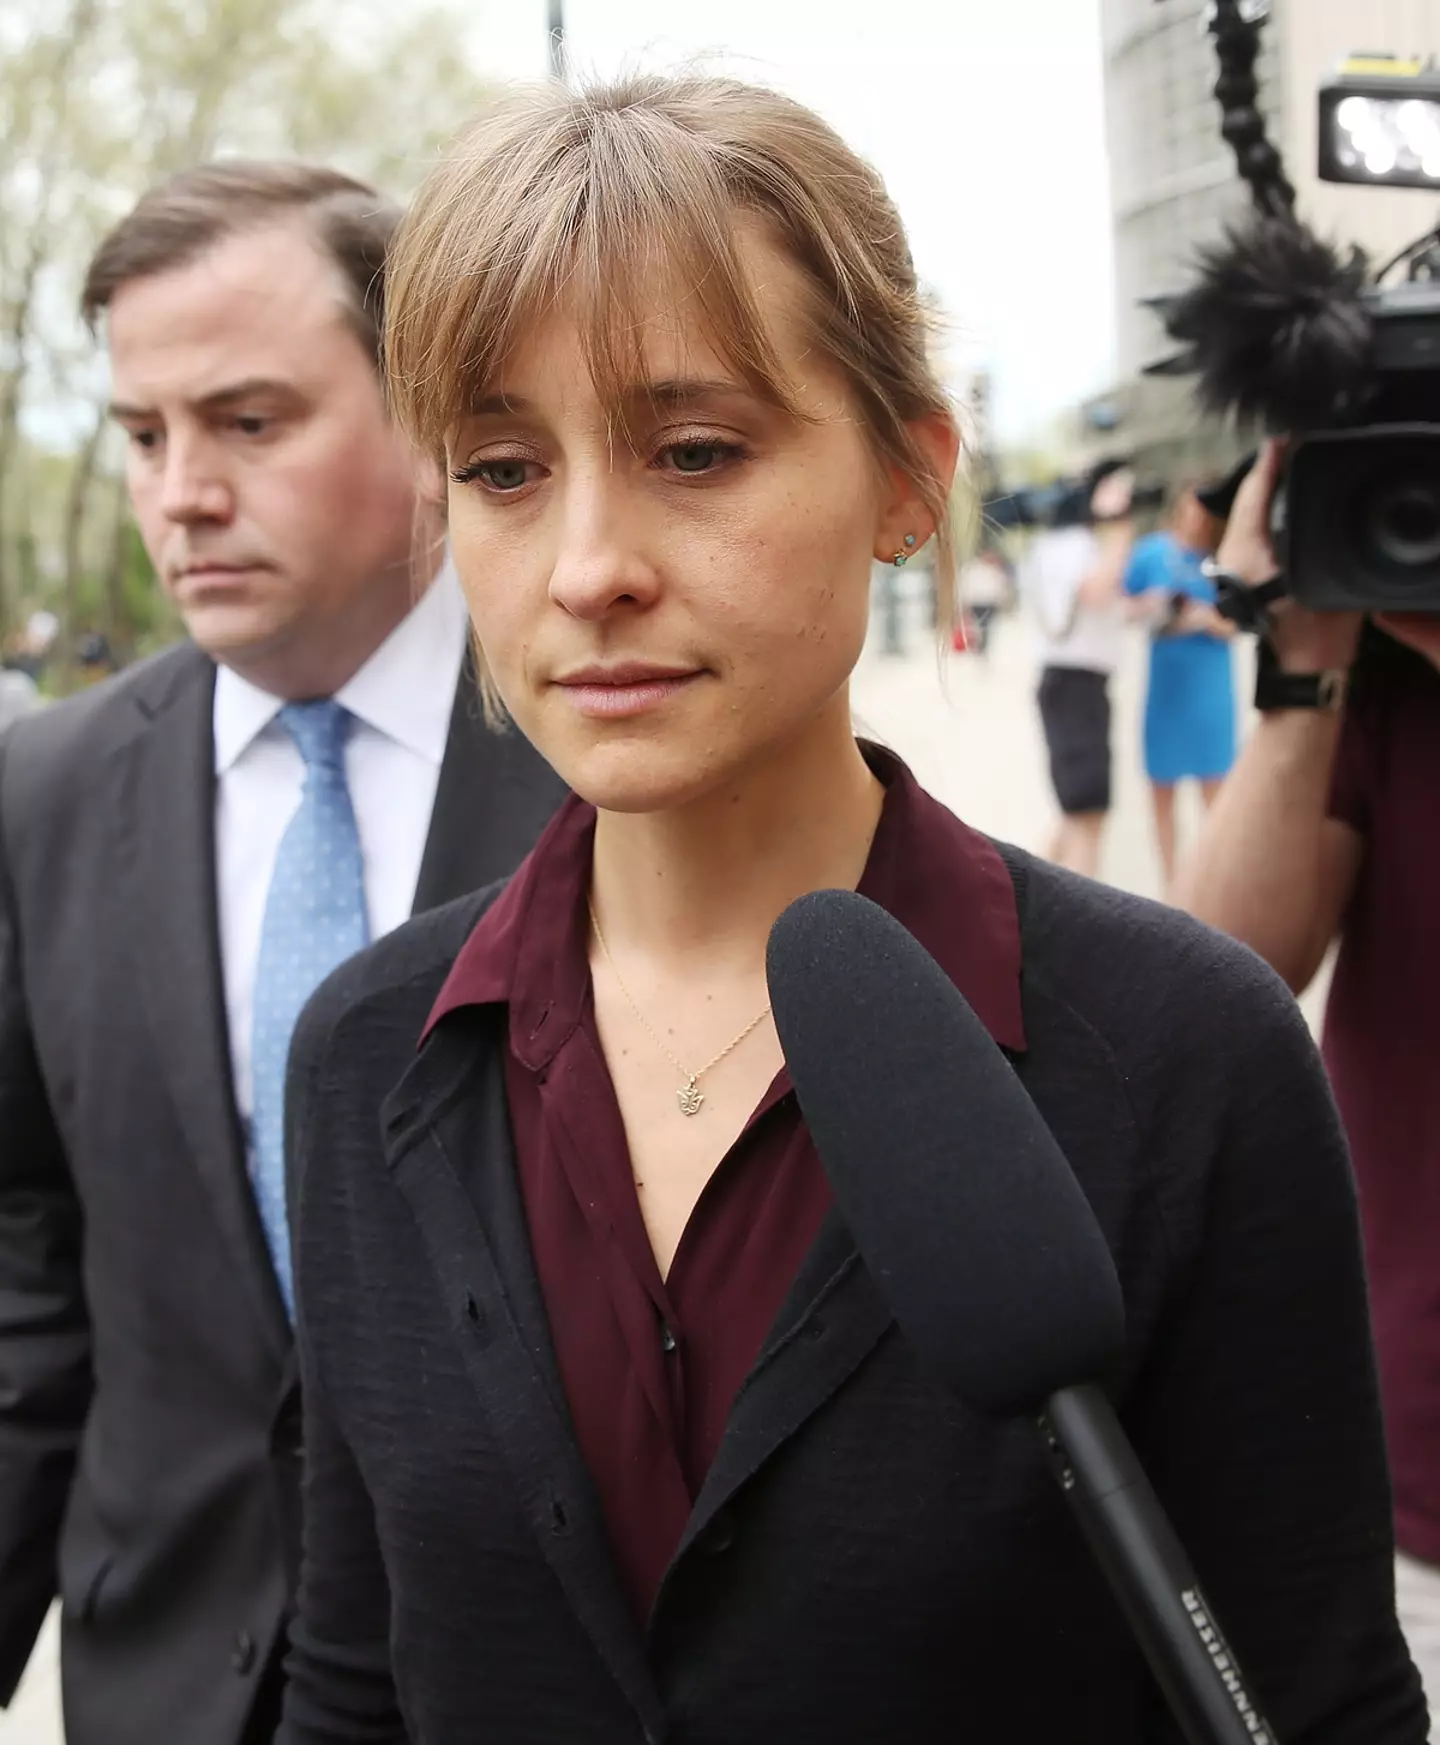 Allison Mack pleaded guilty to charges that she manipulated women into becoming sex slaves for a cult.